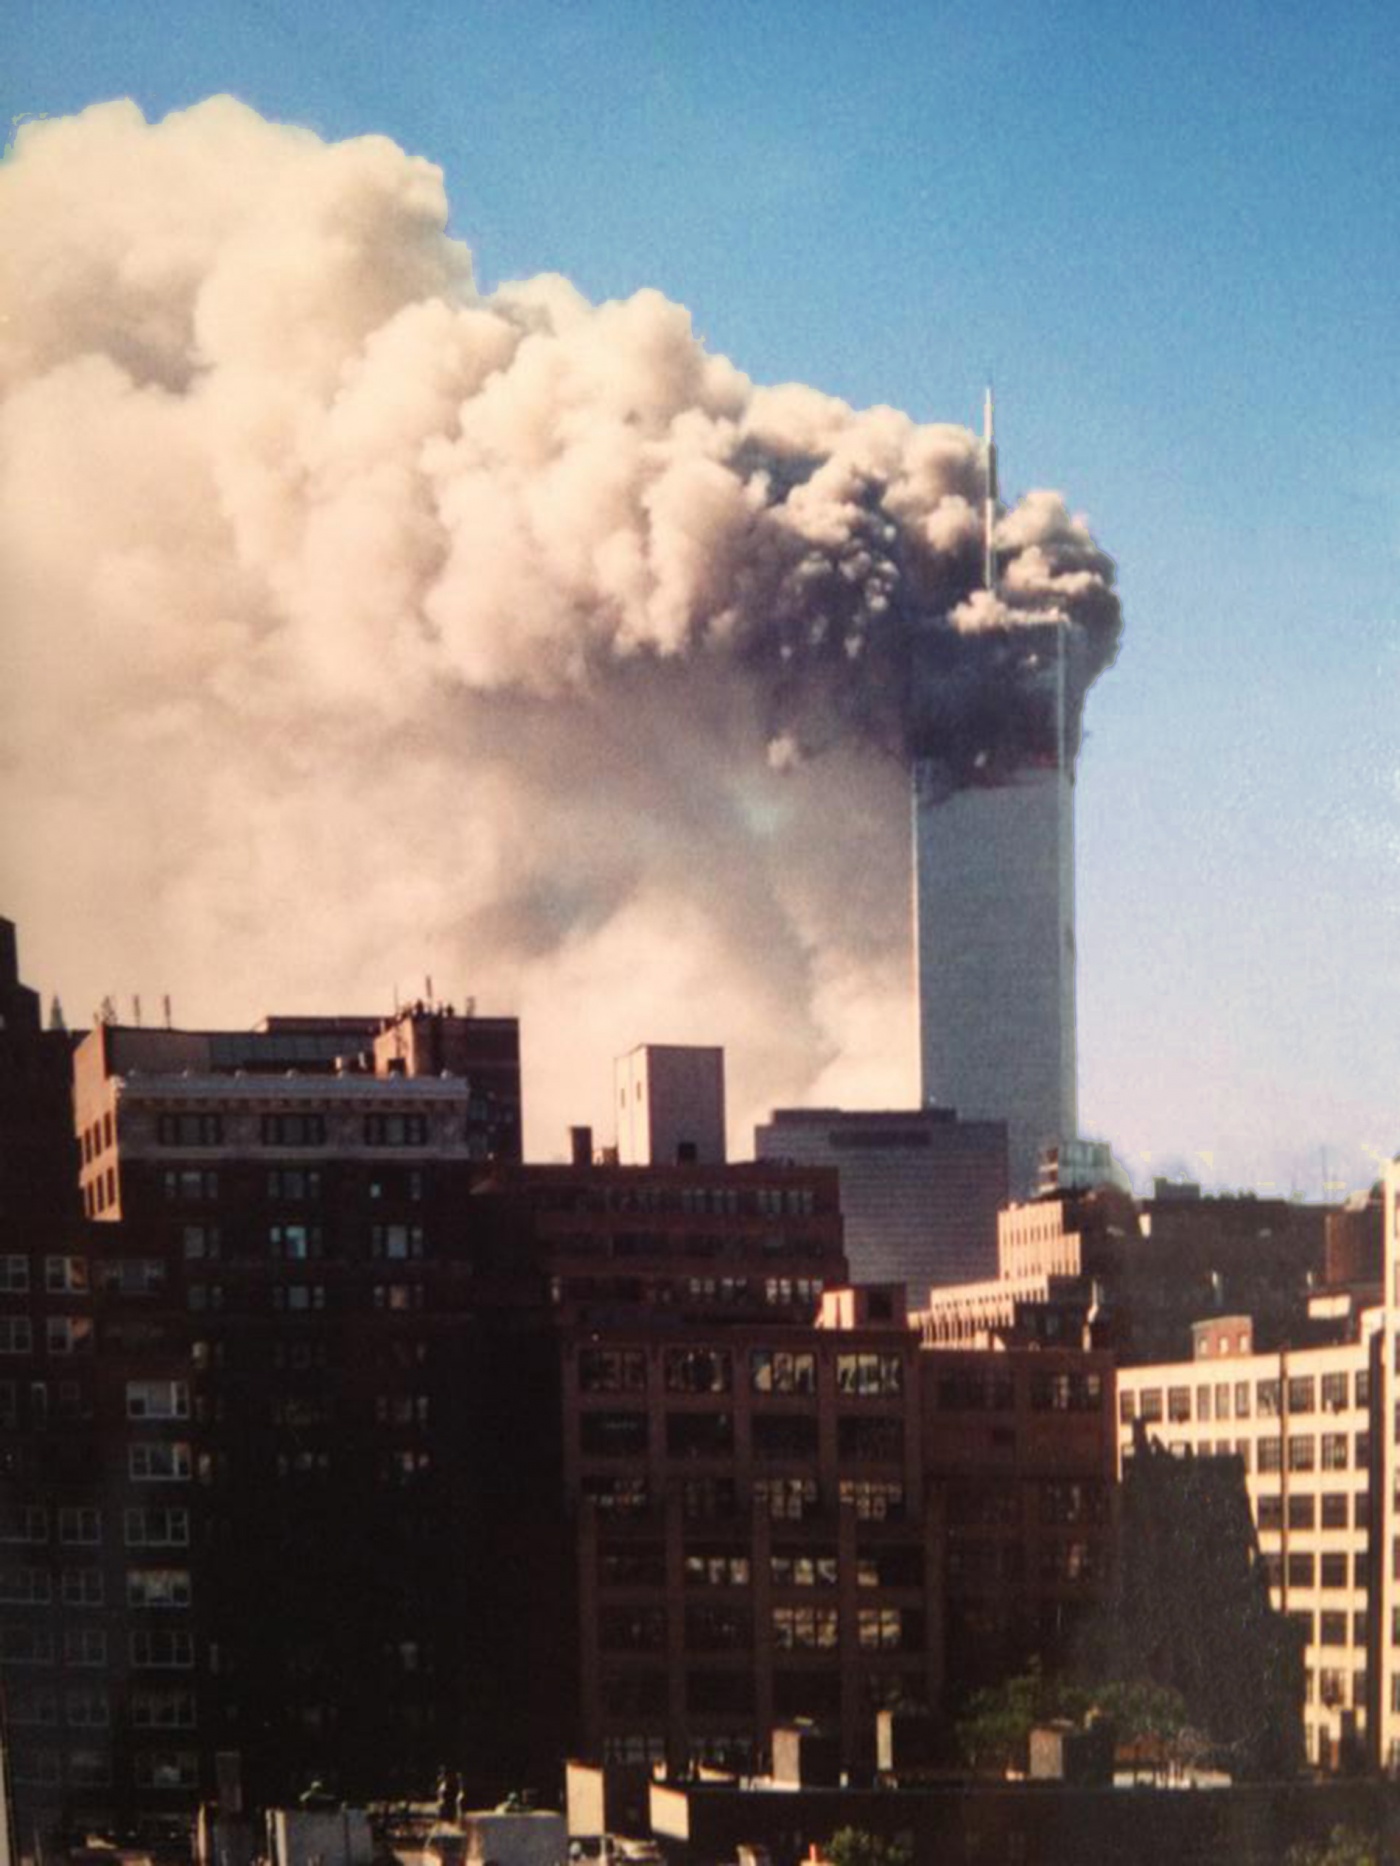 Image of first tower fallen